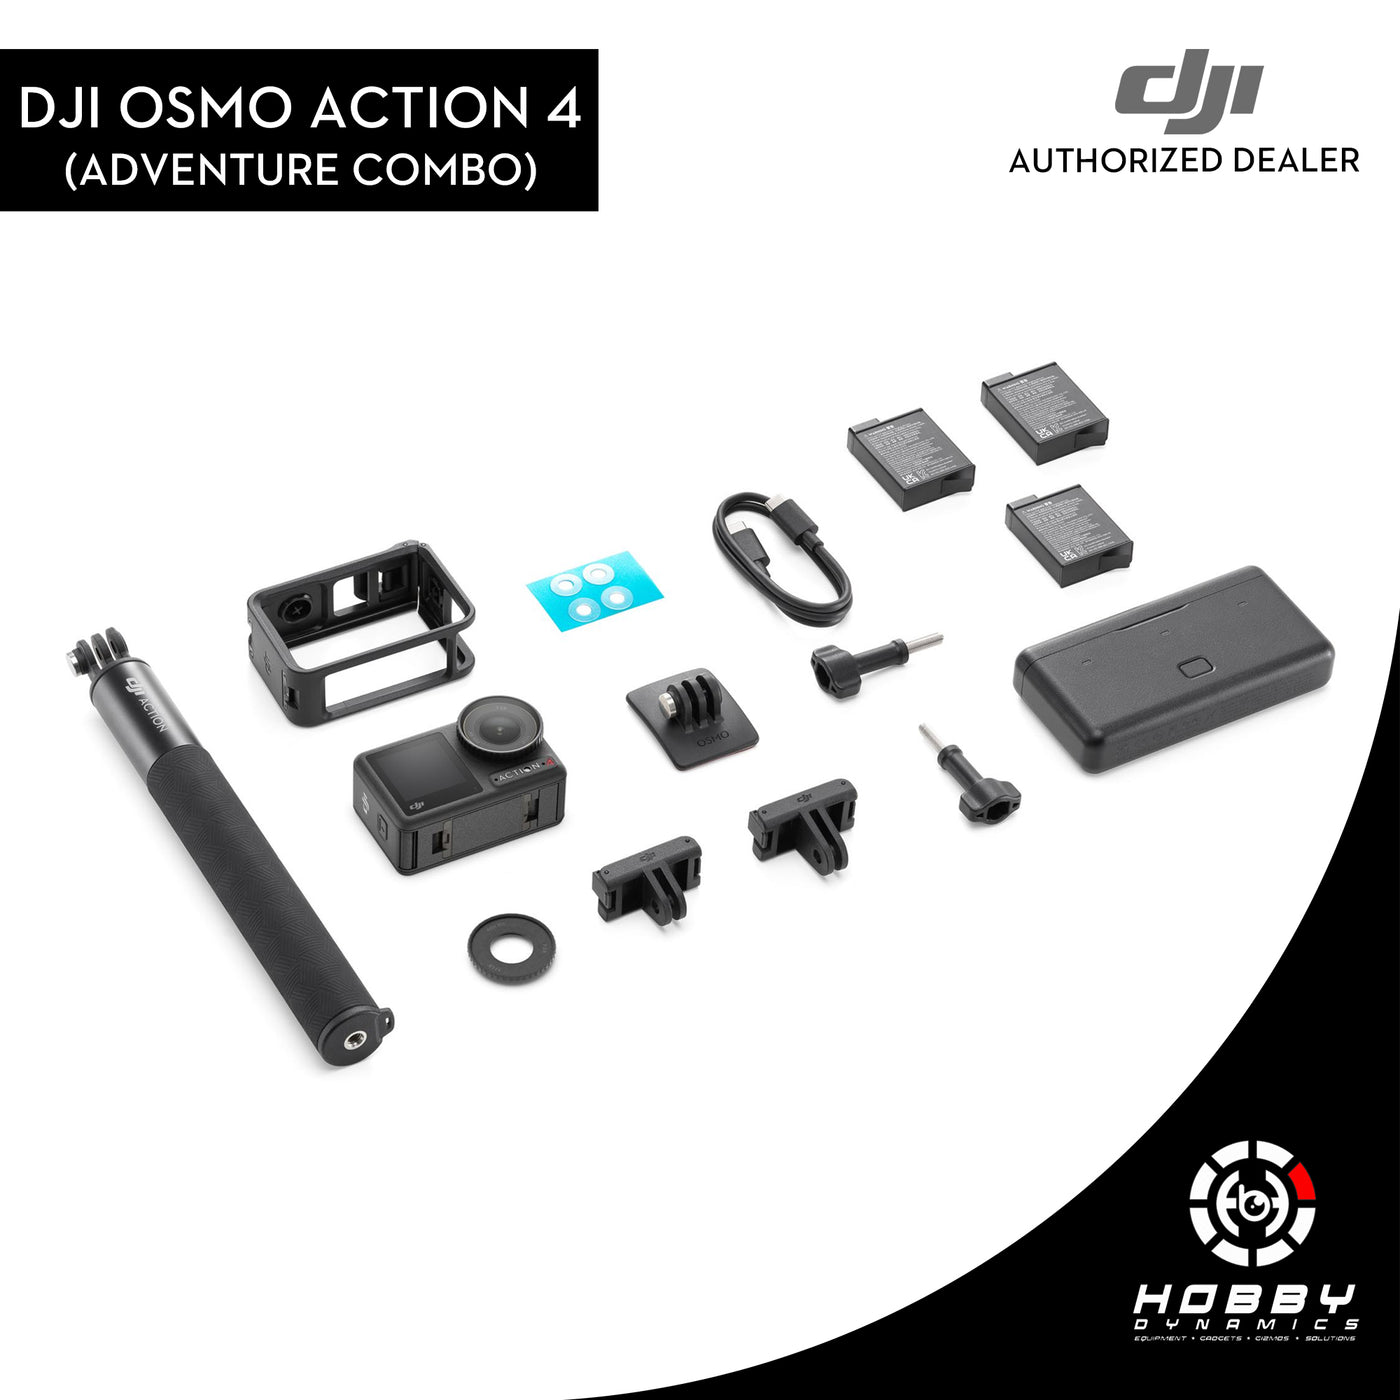 DJI Osmo Action 4 Adventure Combo with Sandisk Extreme 64GB SD Card